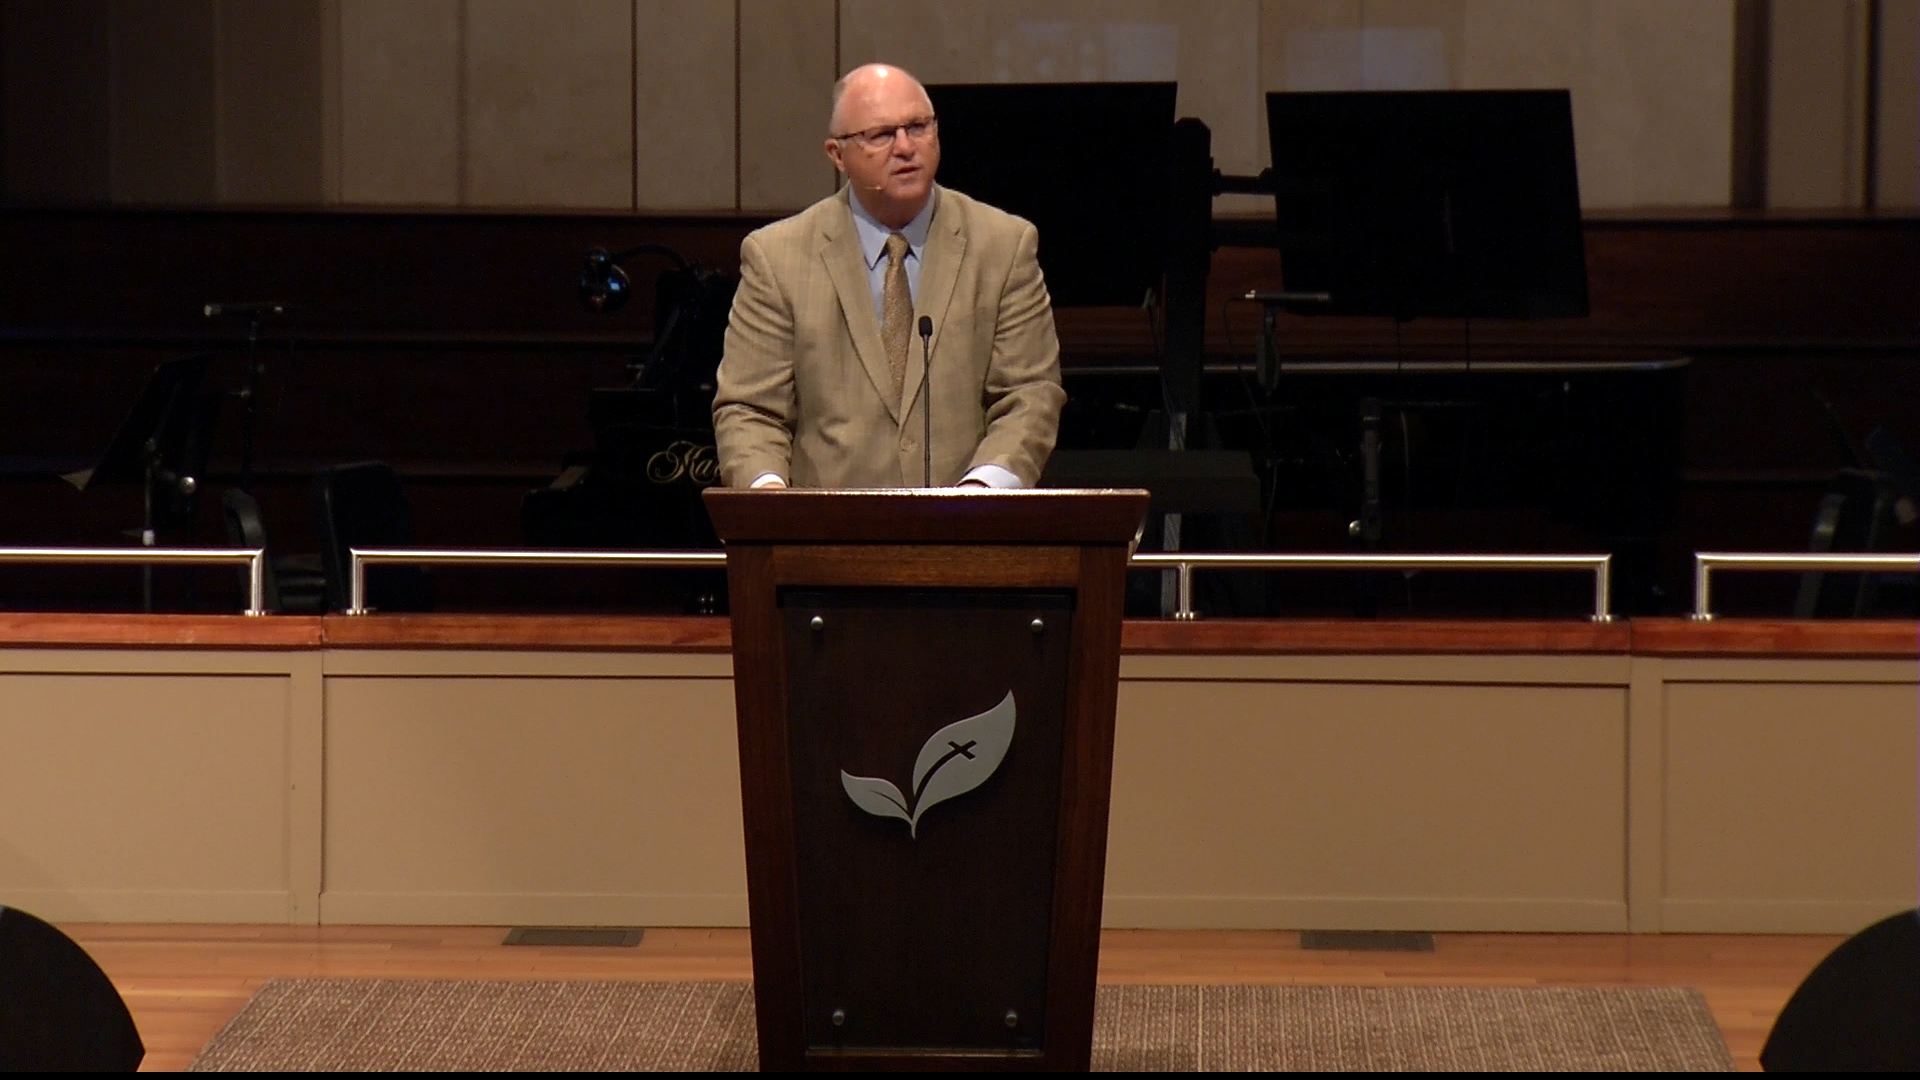 Pastor Paul Chappell: Basics for the New Year